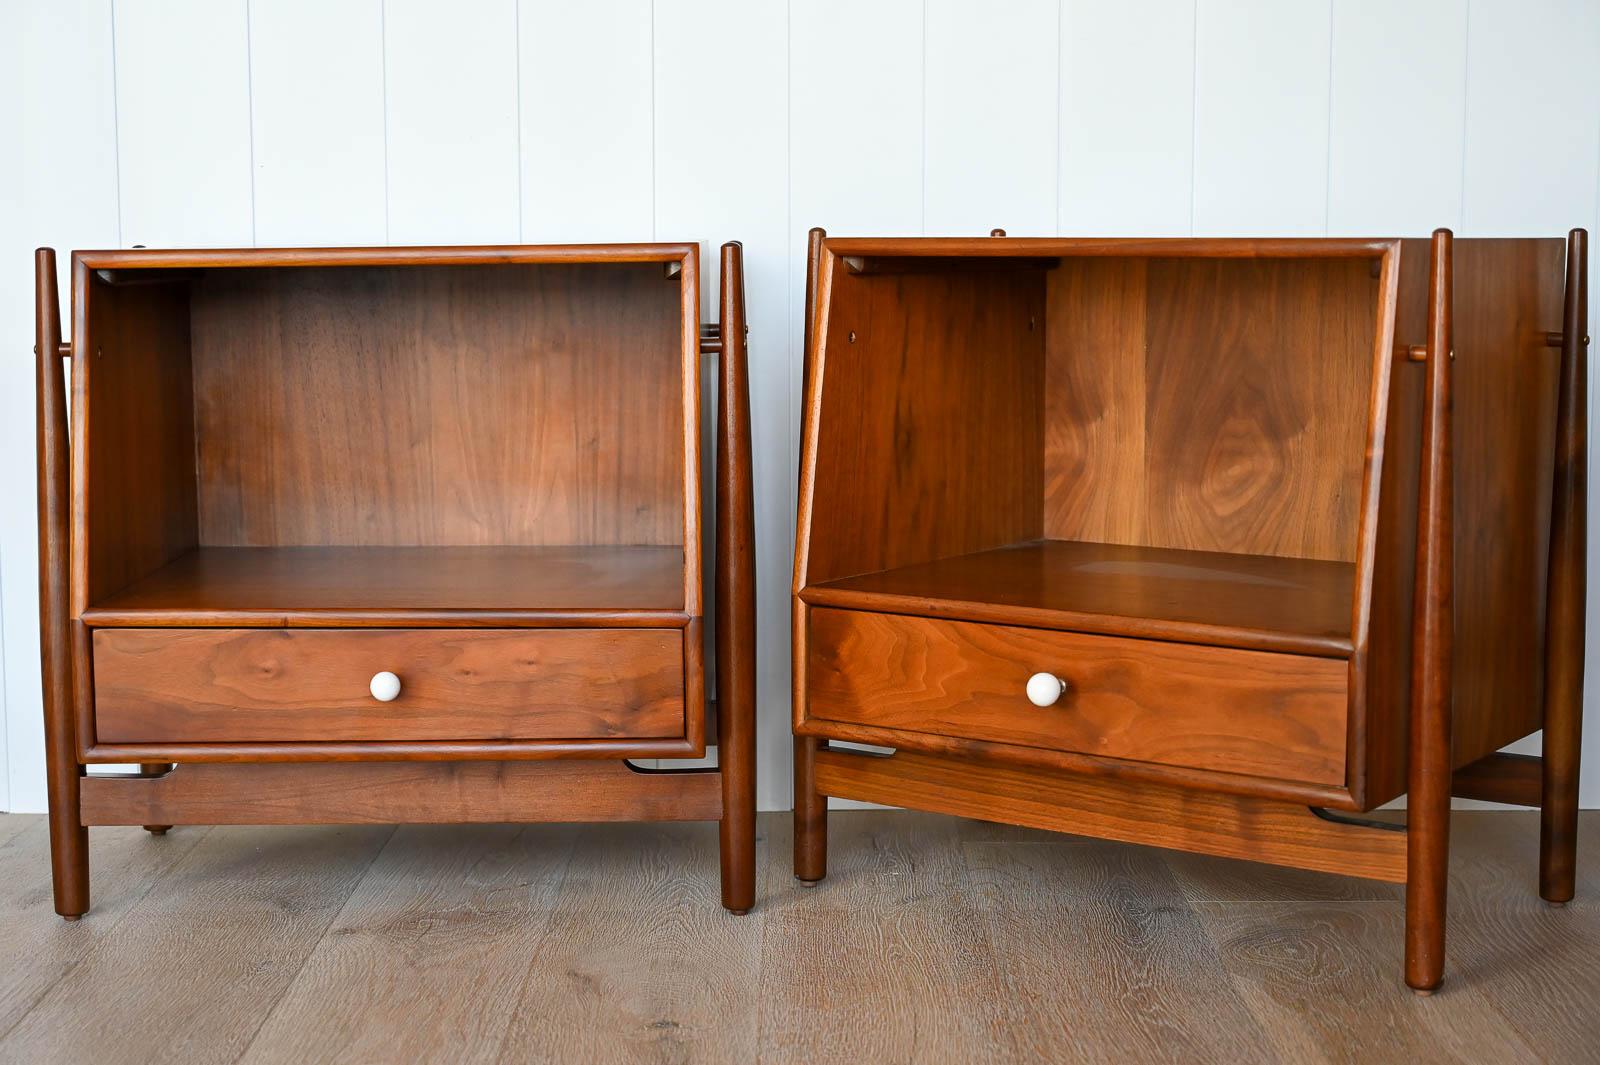 Pair of Kipp Stewart and Stewart McDougall Walnut Nighstands, ca. 1960.  Beautiful matched pair of walnut nightstands or side tables by Kipp Stewart and Stewart McDougall for Drexel.  Professionally refinished in excellent condition with original